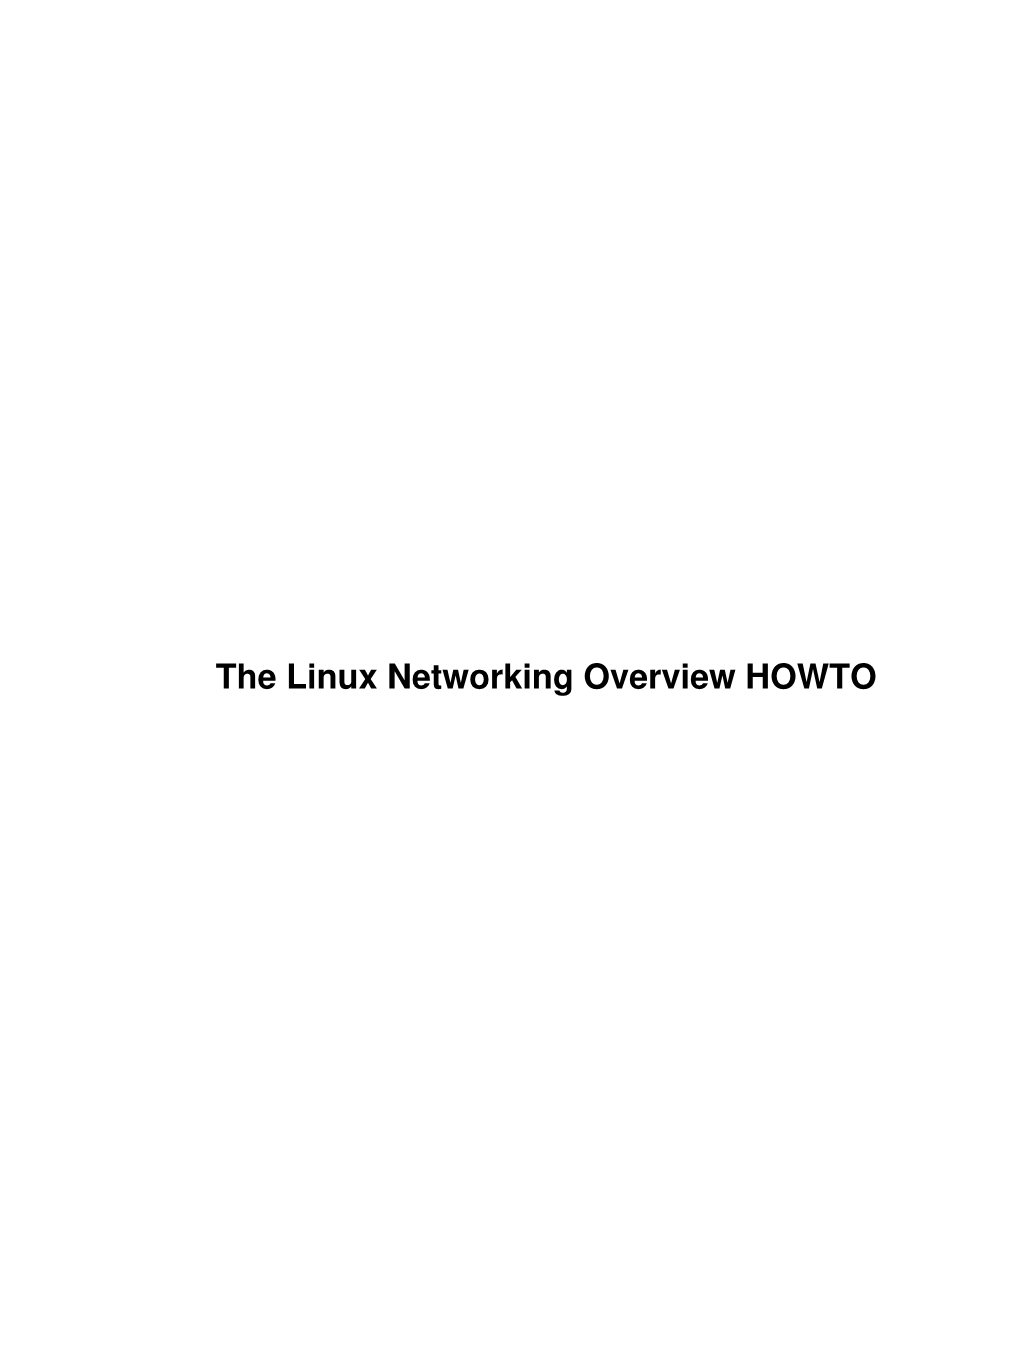 The Linux Networking Overview HOWTO the Linux Networking Overview HOWTO Table of Contents the Linux Networking Overview HOWTO